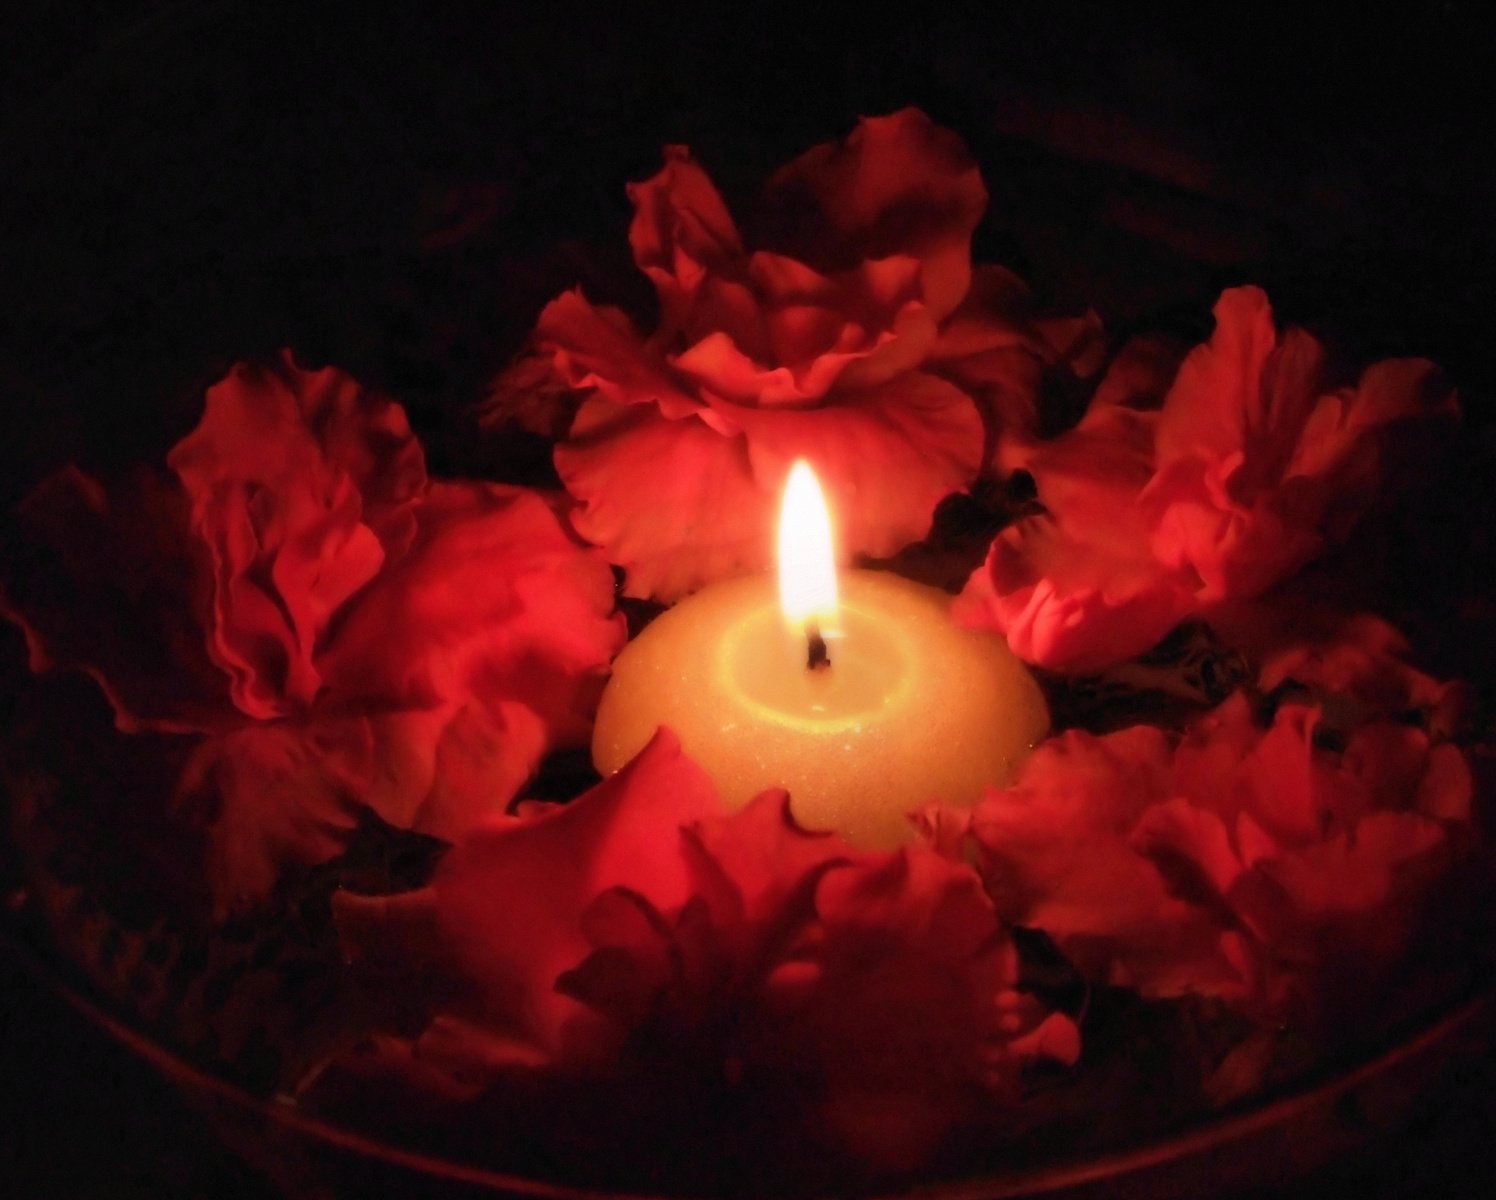 a candle lit in some red flowers with a dark background